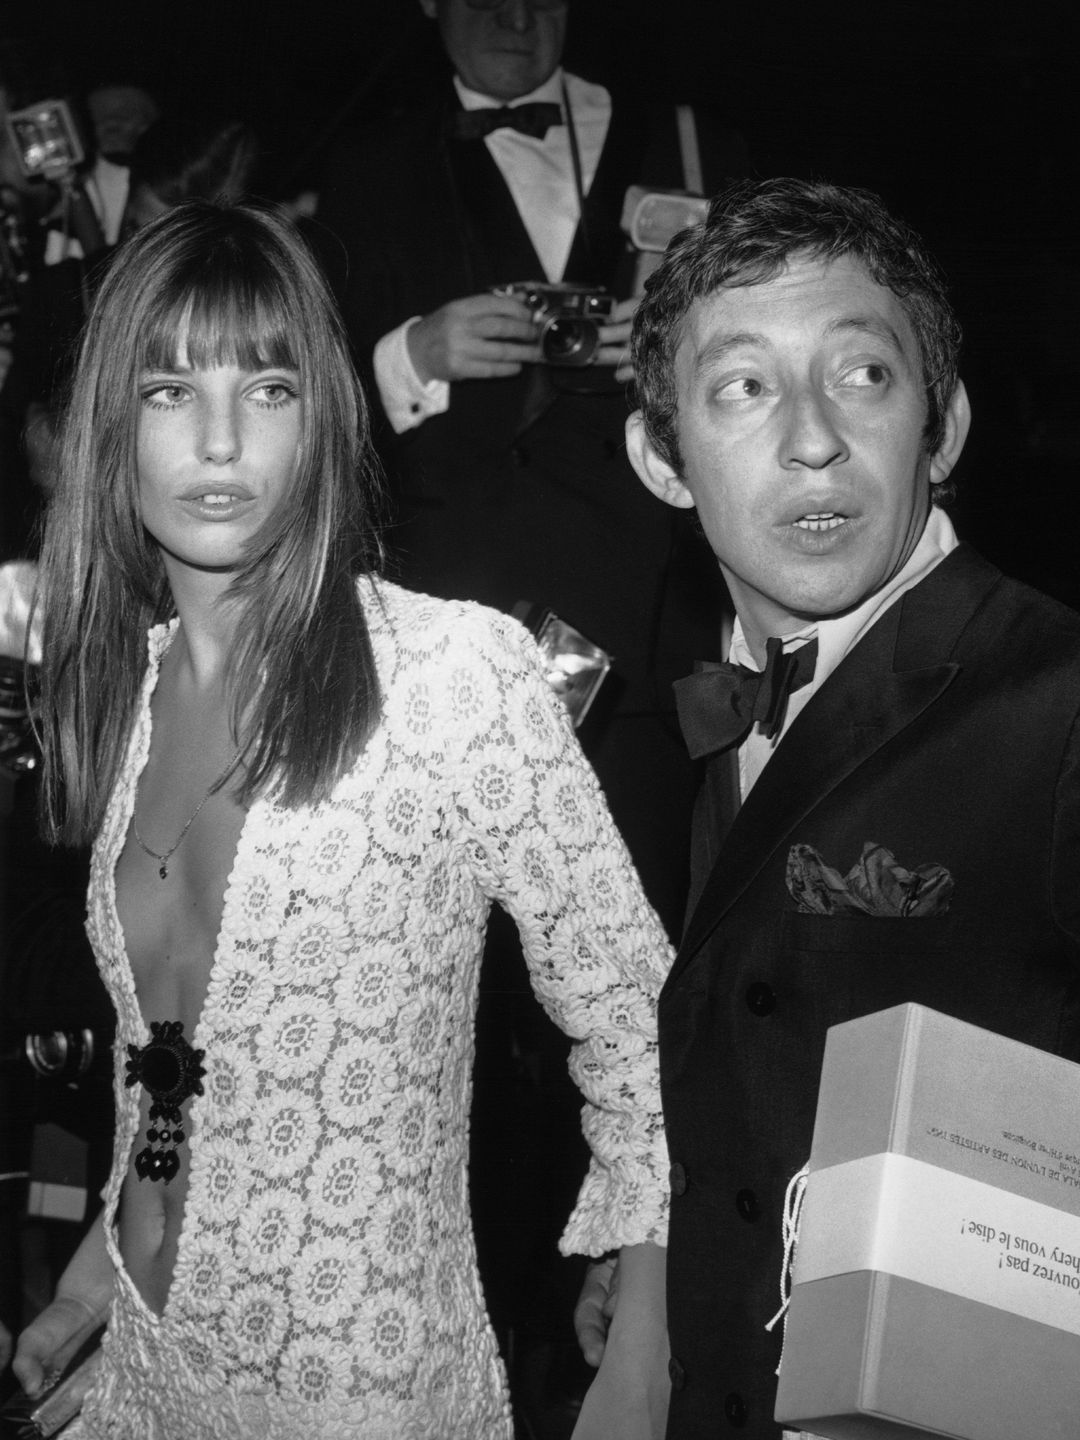 Serge GAINSBOURG and Jane BIRKIN arriving at the Artists Union's Gala, Paris, April 1969